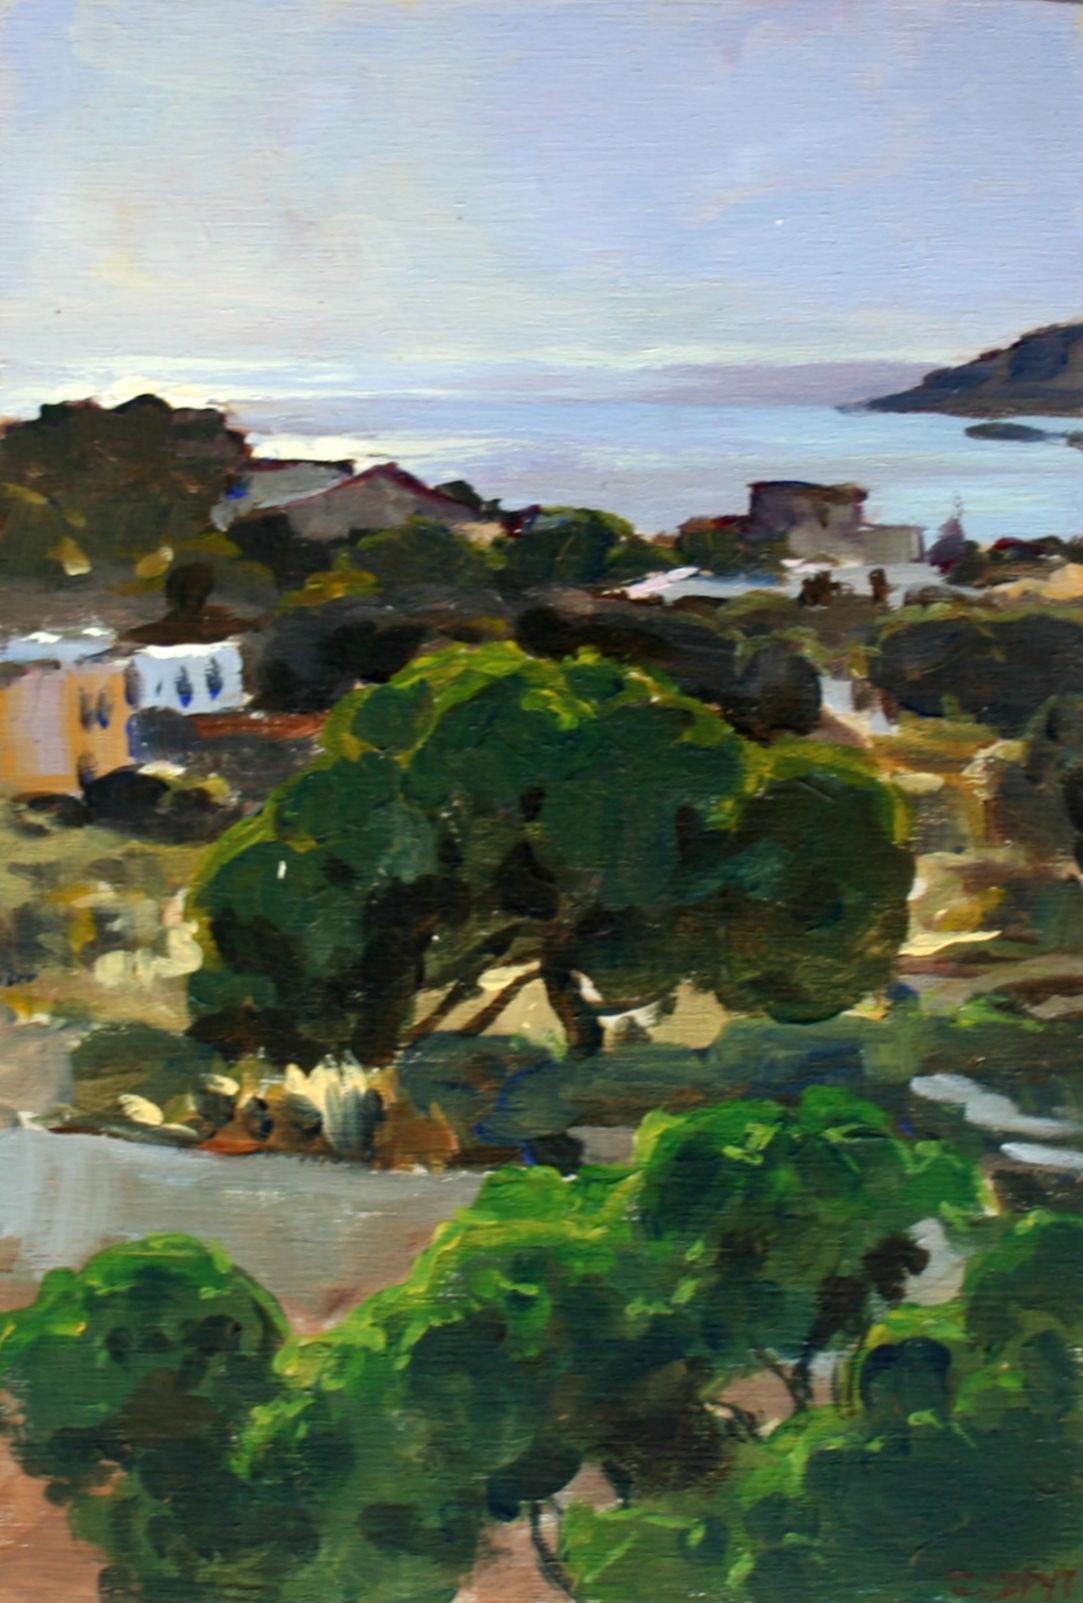 Syros afternoon - XXI Century, Contemporary Landscape Oil Painting, Realistic